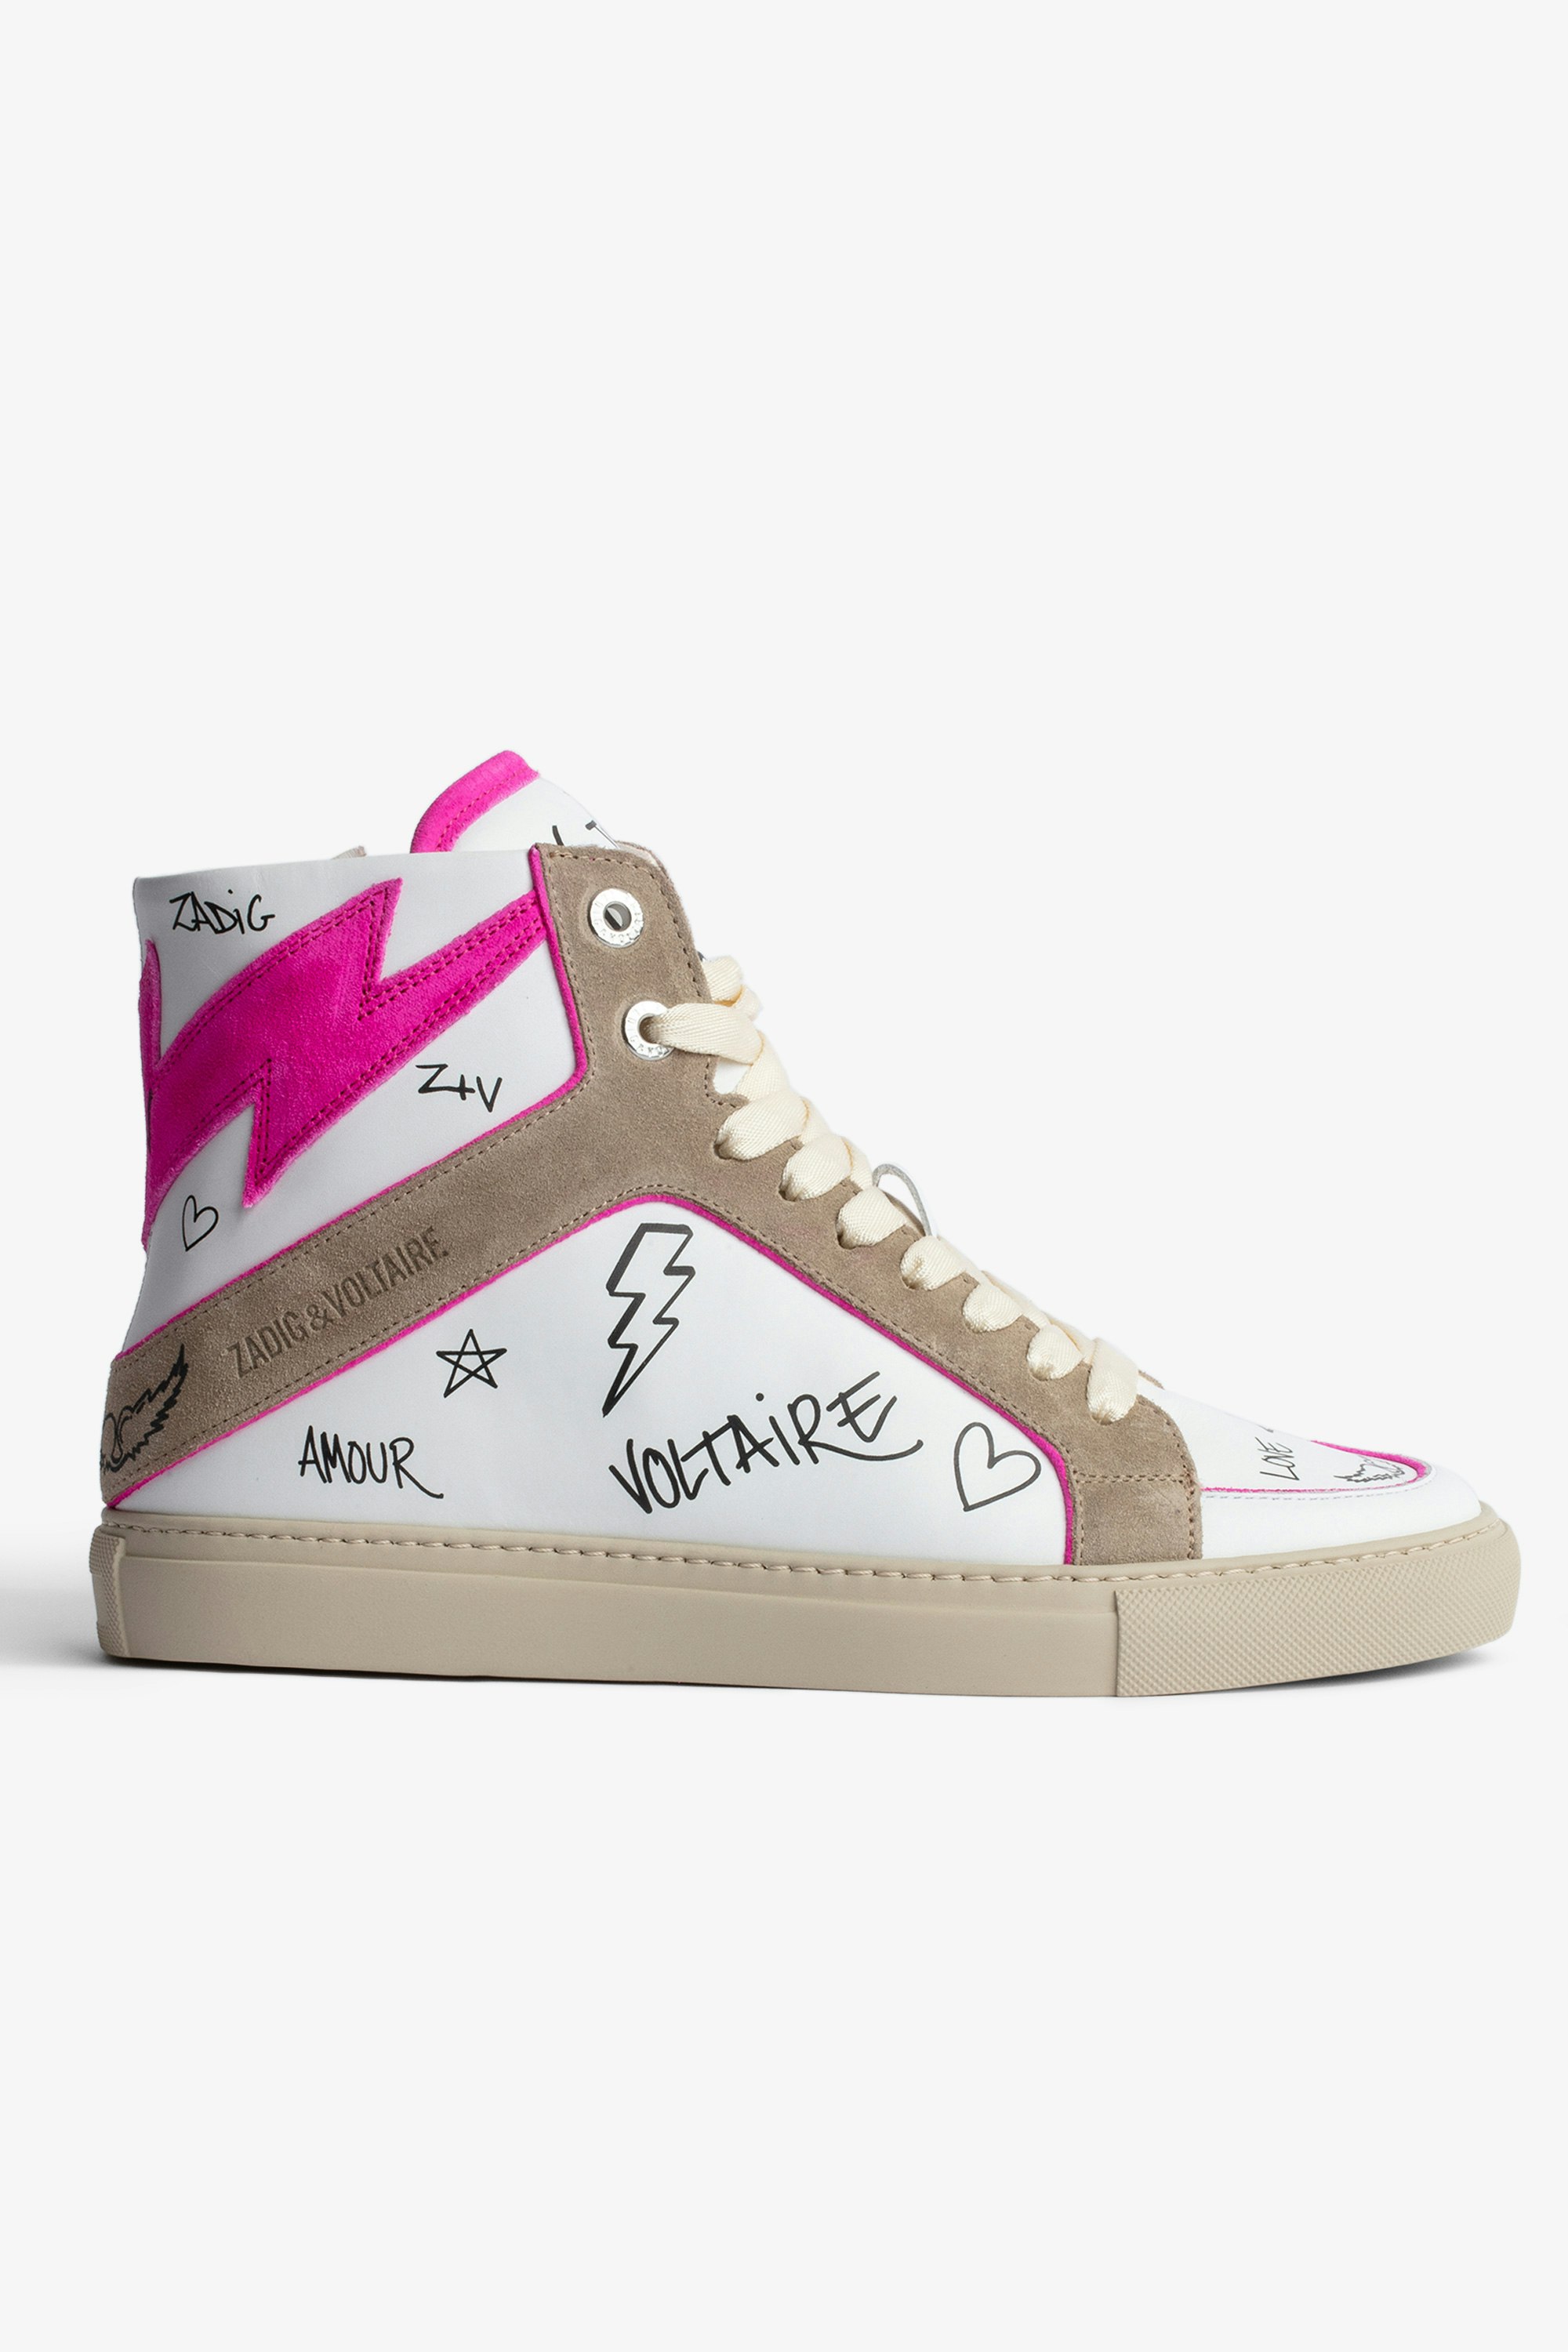 ZV1747 High Flash Sneakers  High-top sneakers in pink and white smooth leather and suede with lettering